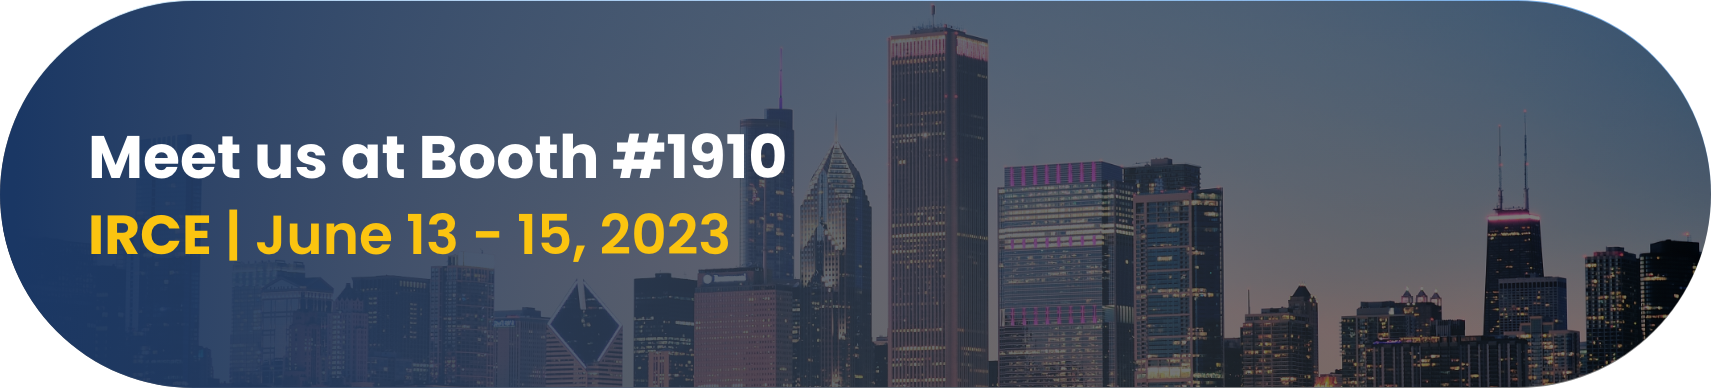 IRCE 2023, Retail Innovation Conference &#038; Expo (IRCE) 2023